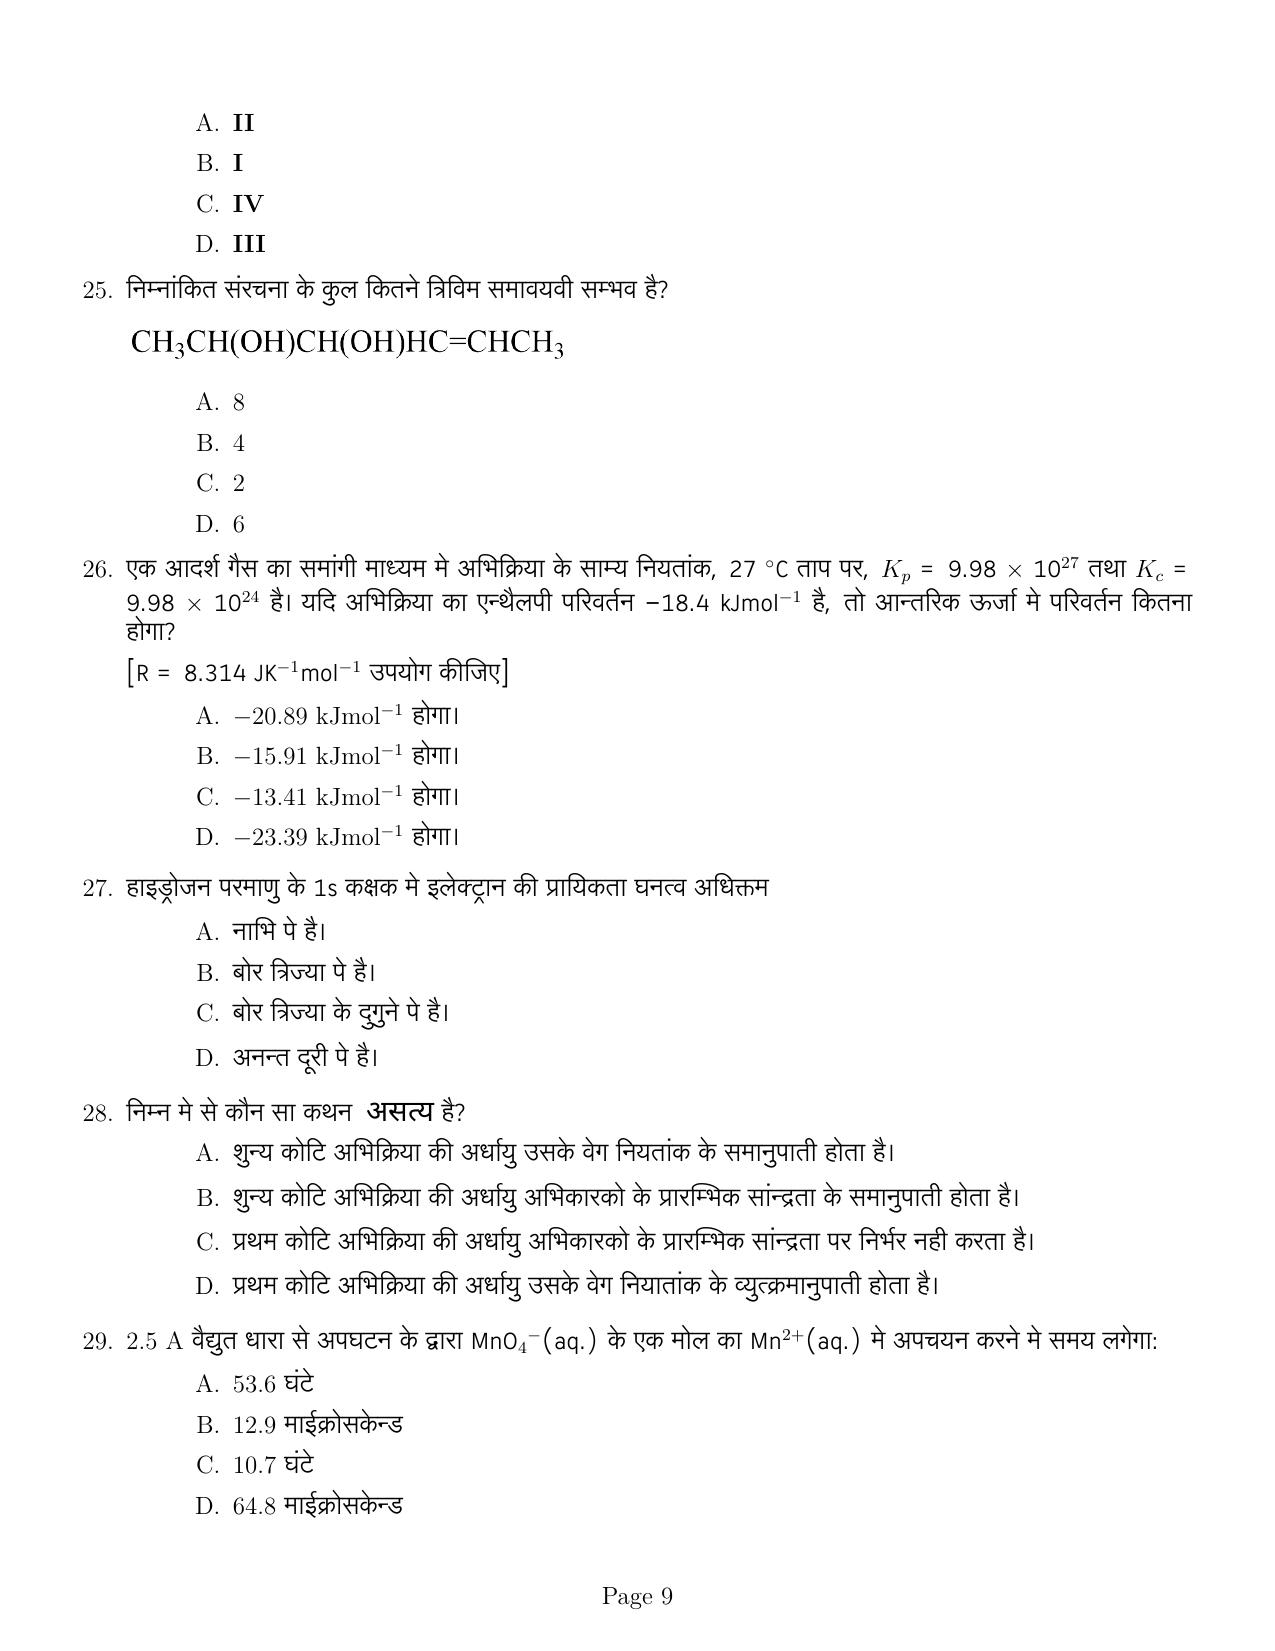 IISER Aptitude Test 2021 Hindi Question Paper - Page 9